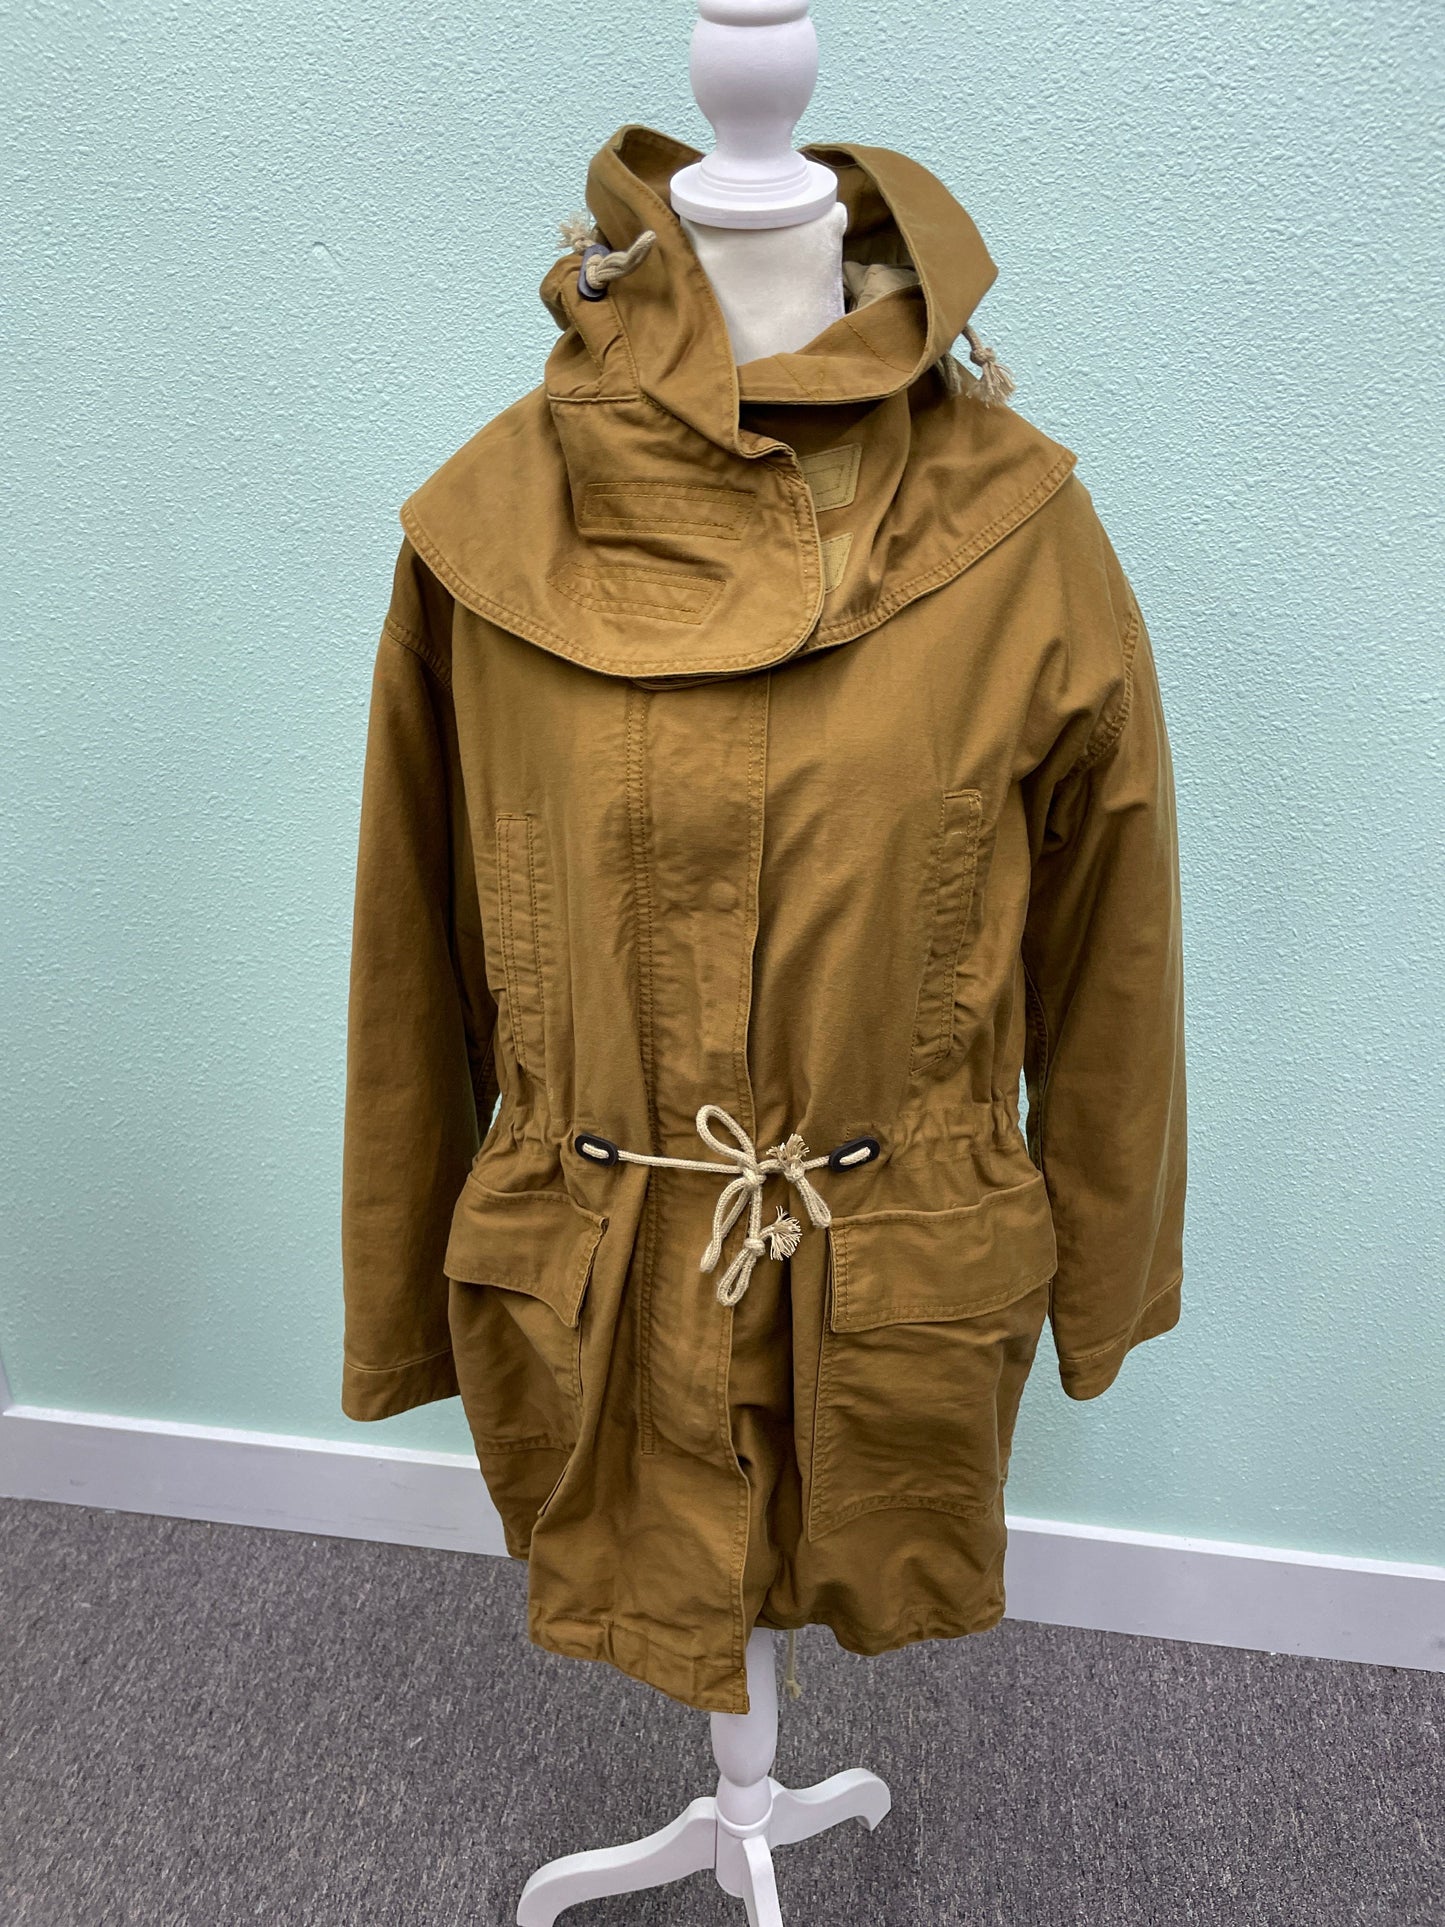 GAP Military Fishtail Parka With Removable Hood and Liner Jacket Size M Brown 5H